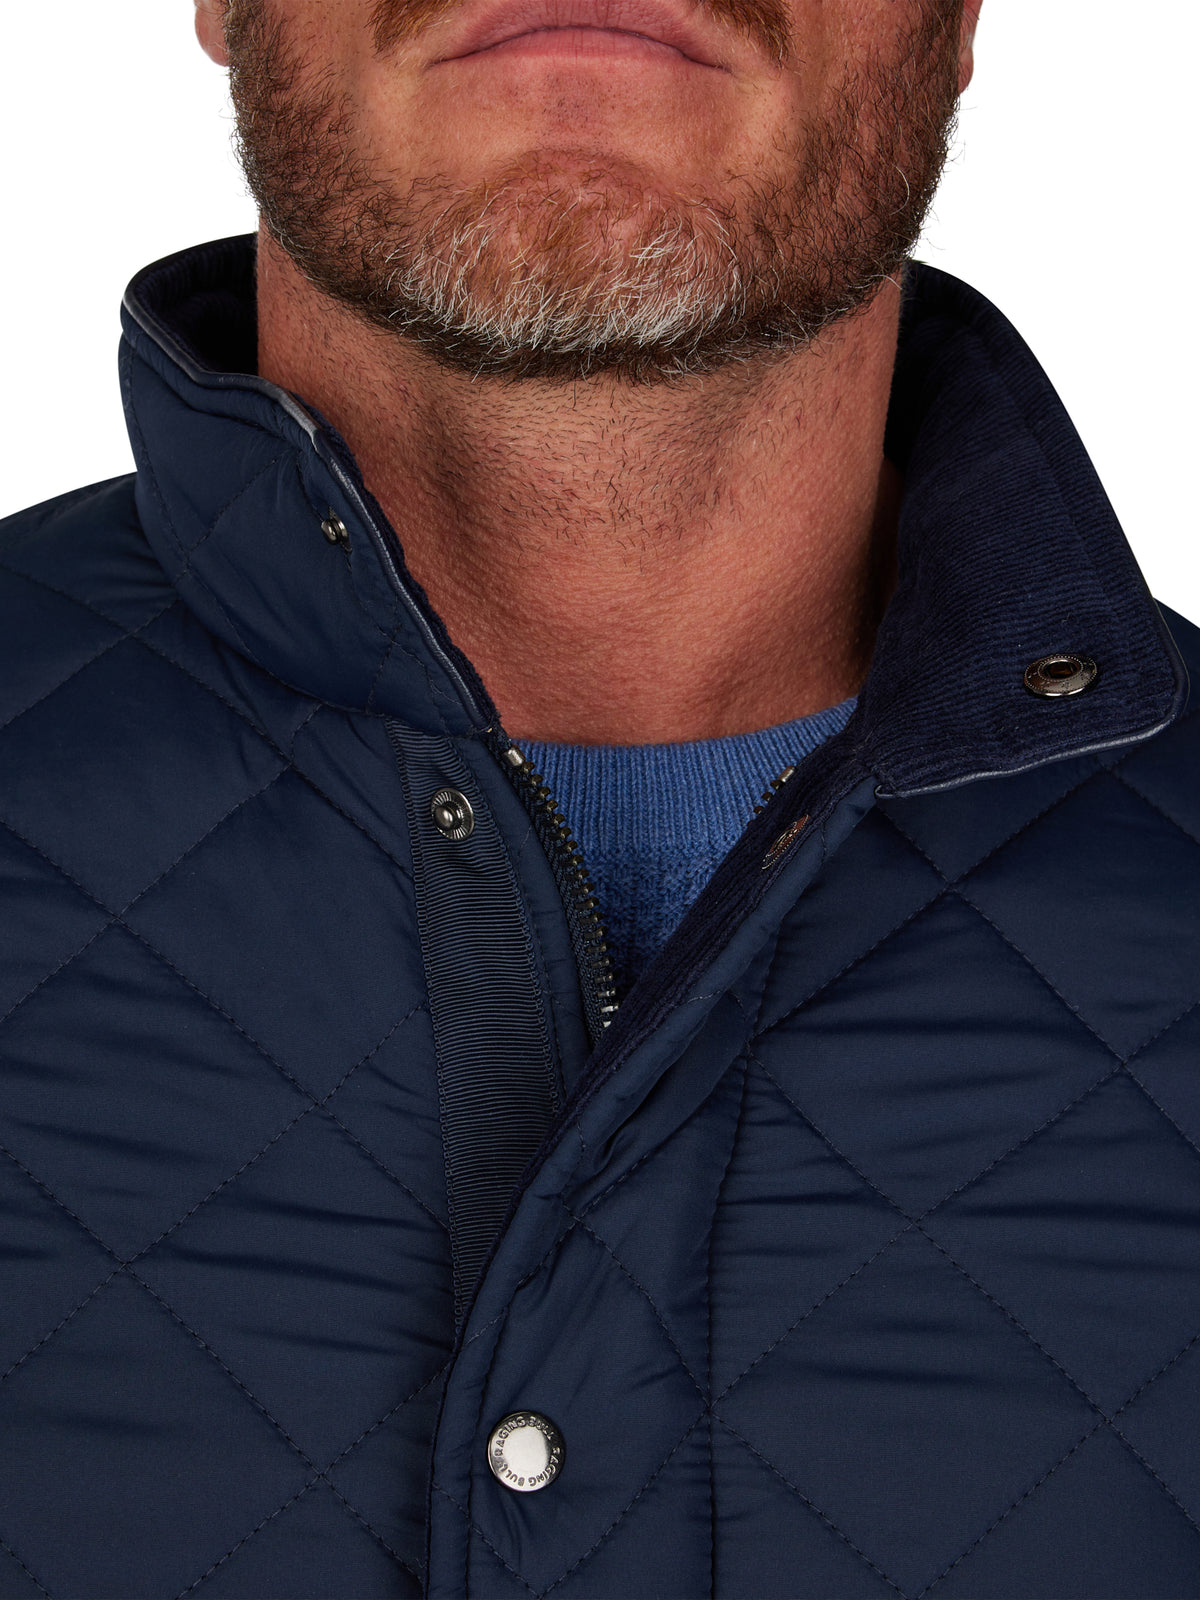 Classic Quilted Field Jacket - Navy